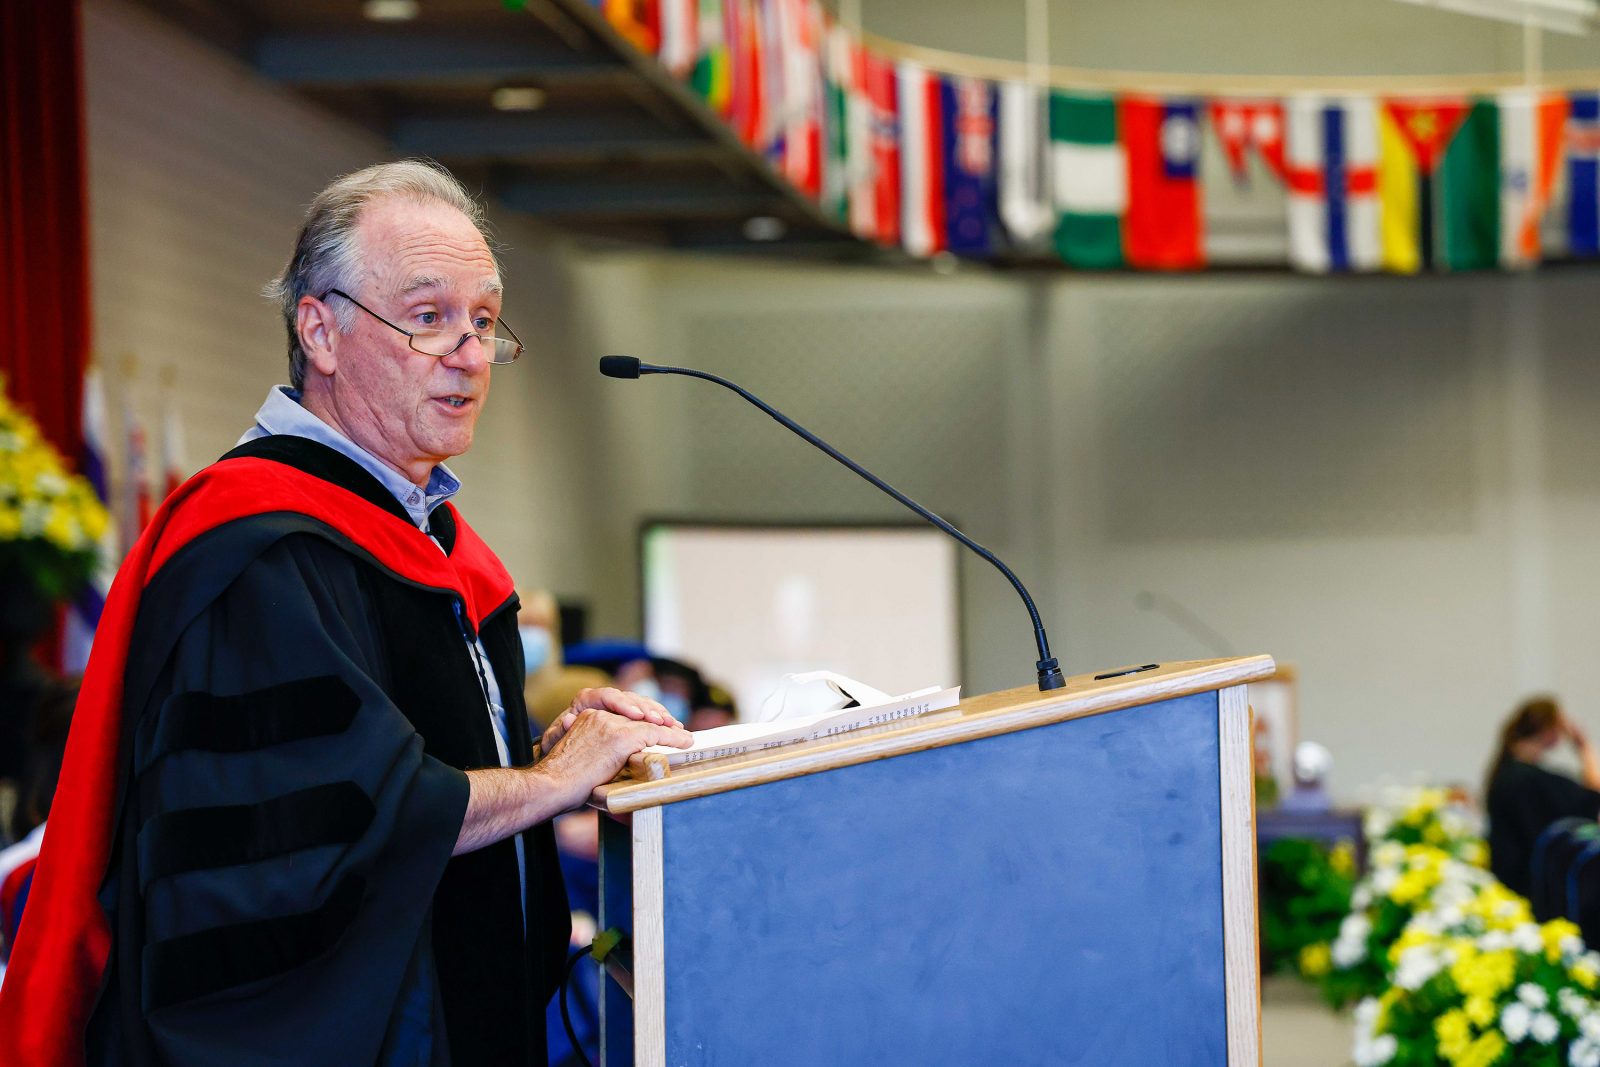 A man in a Convocation gown stands speaking at a podium.